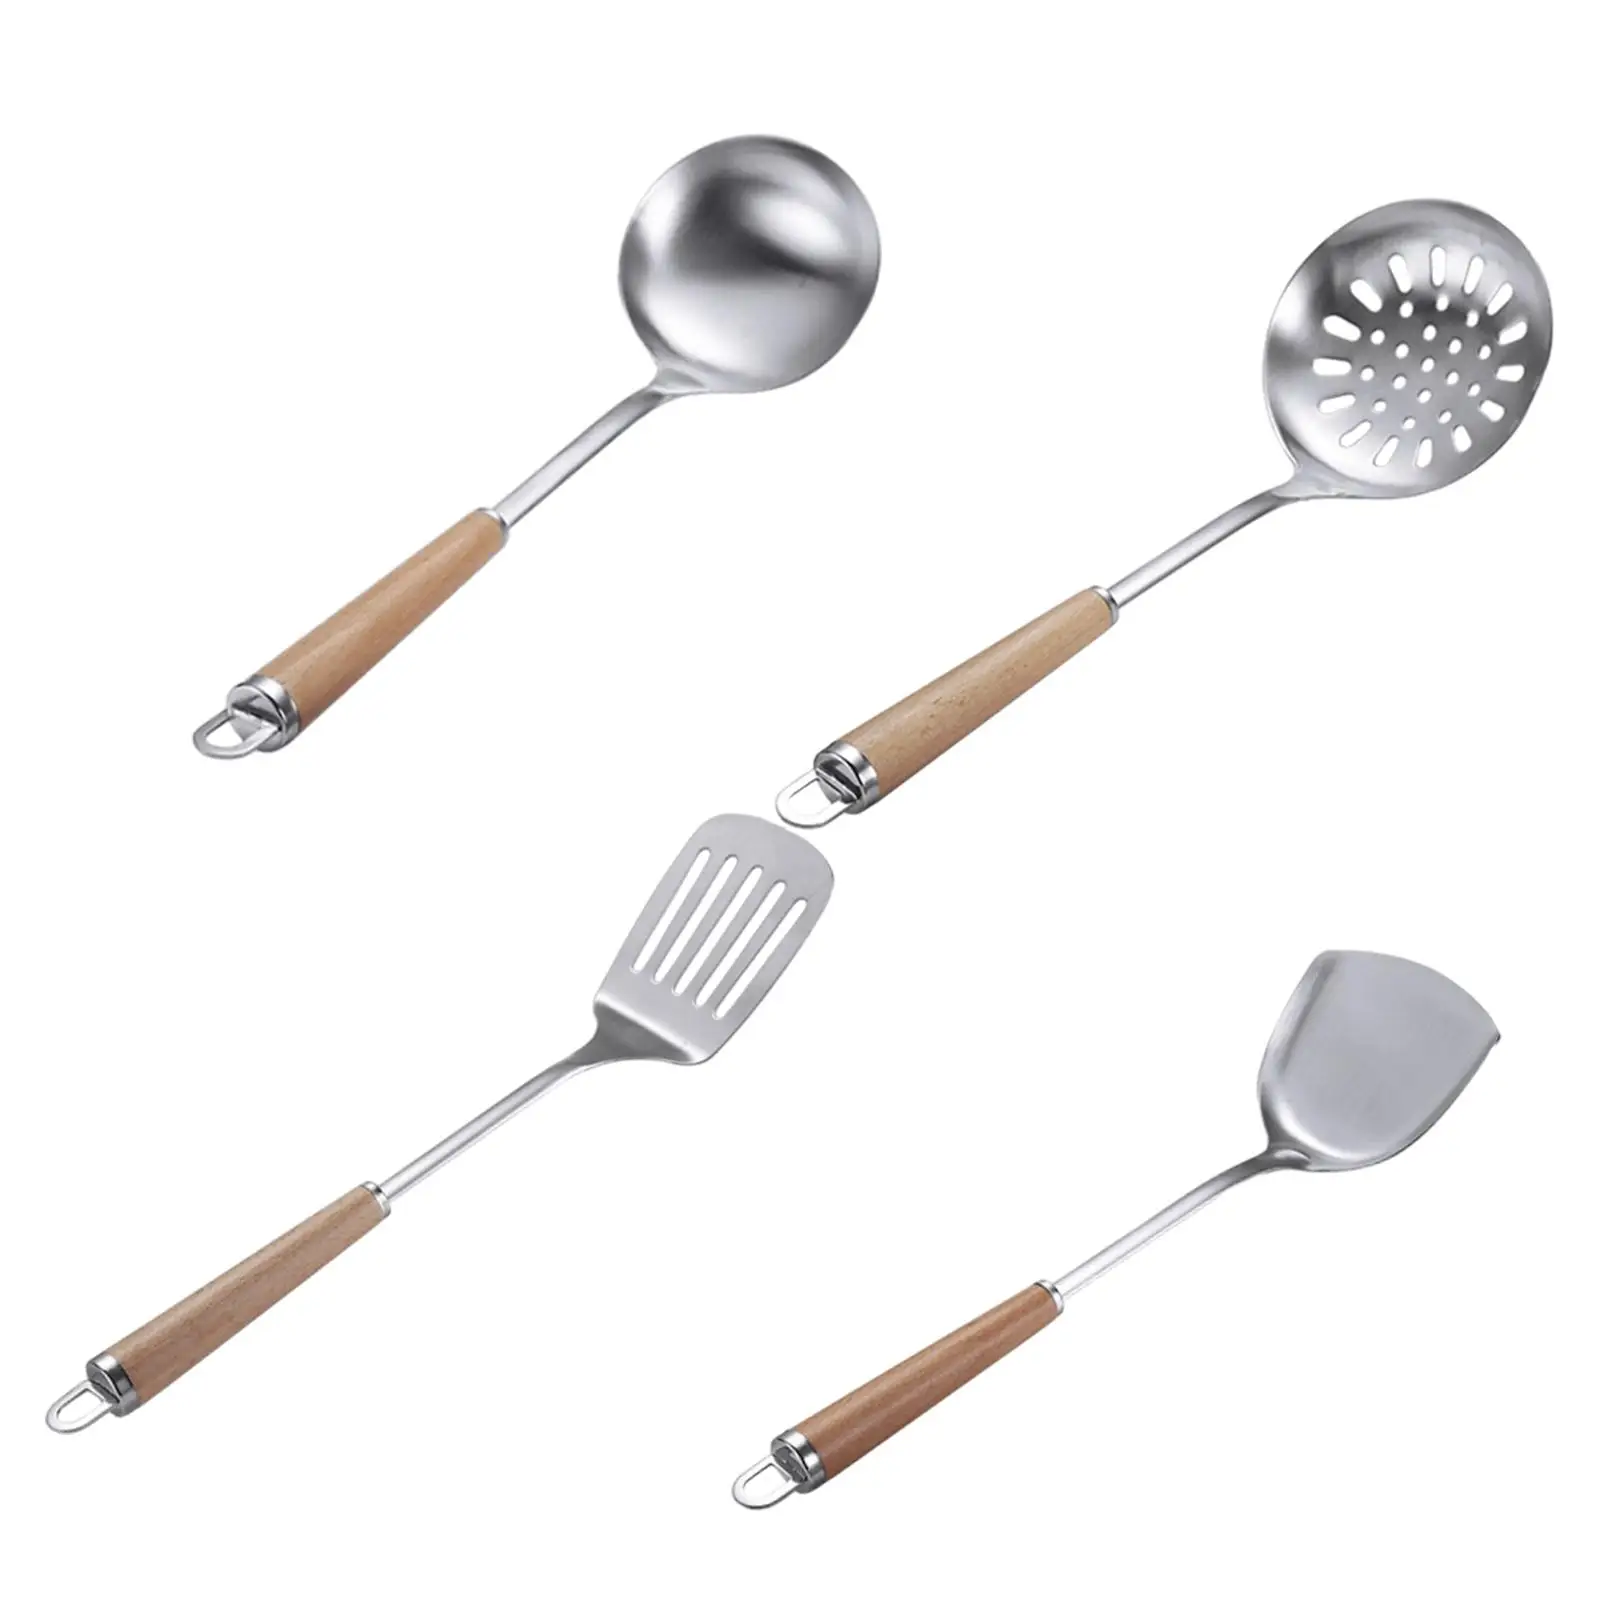 Stainless Steel Cooking Utensils Kitchen Gadgets Multifunctional Cookware Easy to Clean for Home Restaurant Camping Cooking